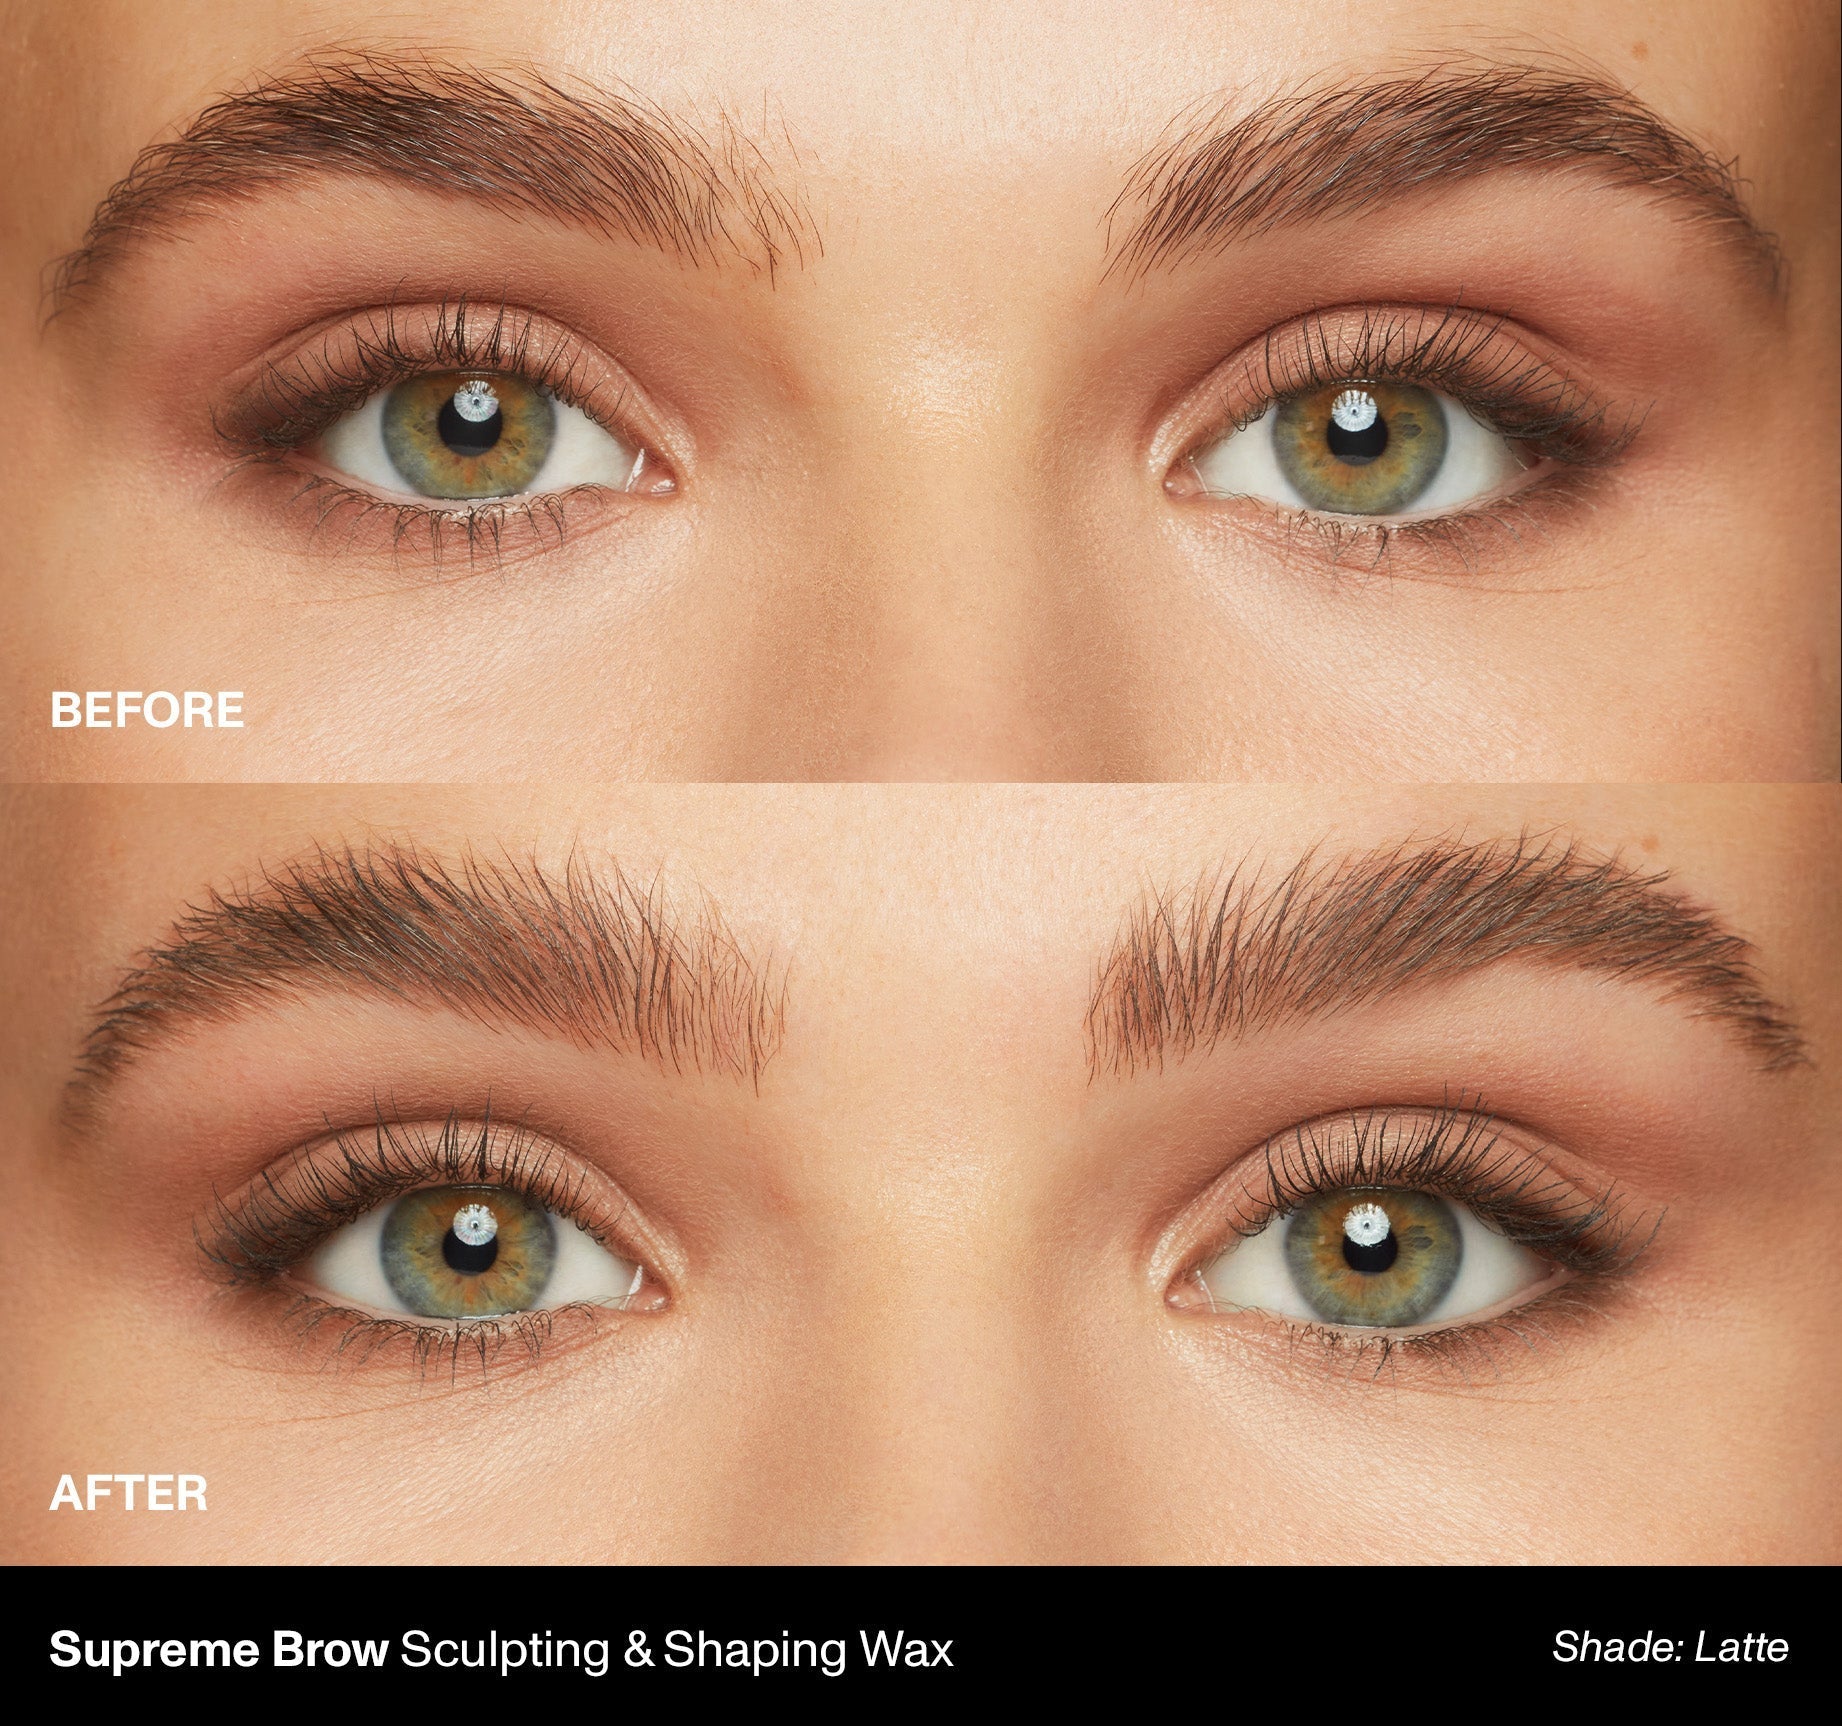 Supreme Brow Sculpting And Shaping Wax - Latte - Image 6